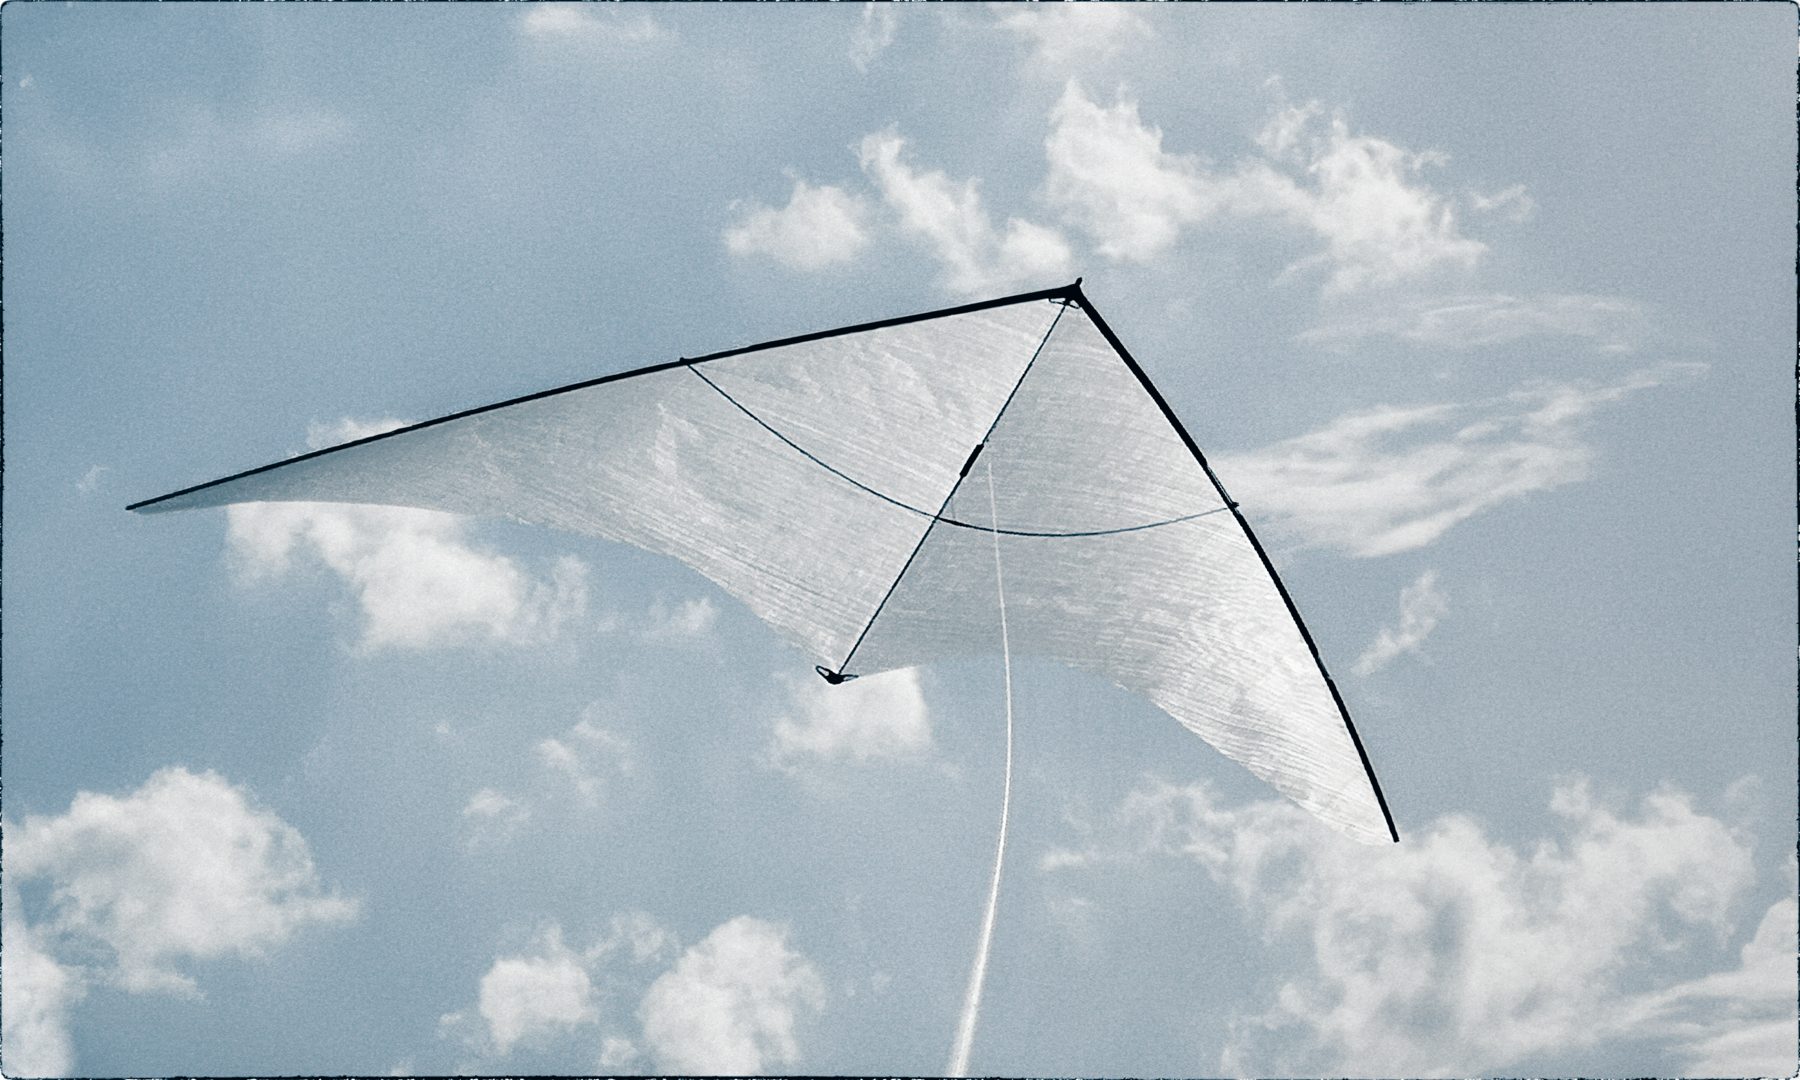 leaving rome: the large zero wind kite in front of some clouds.